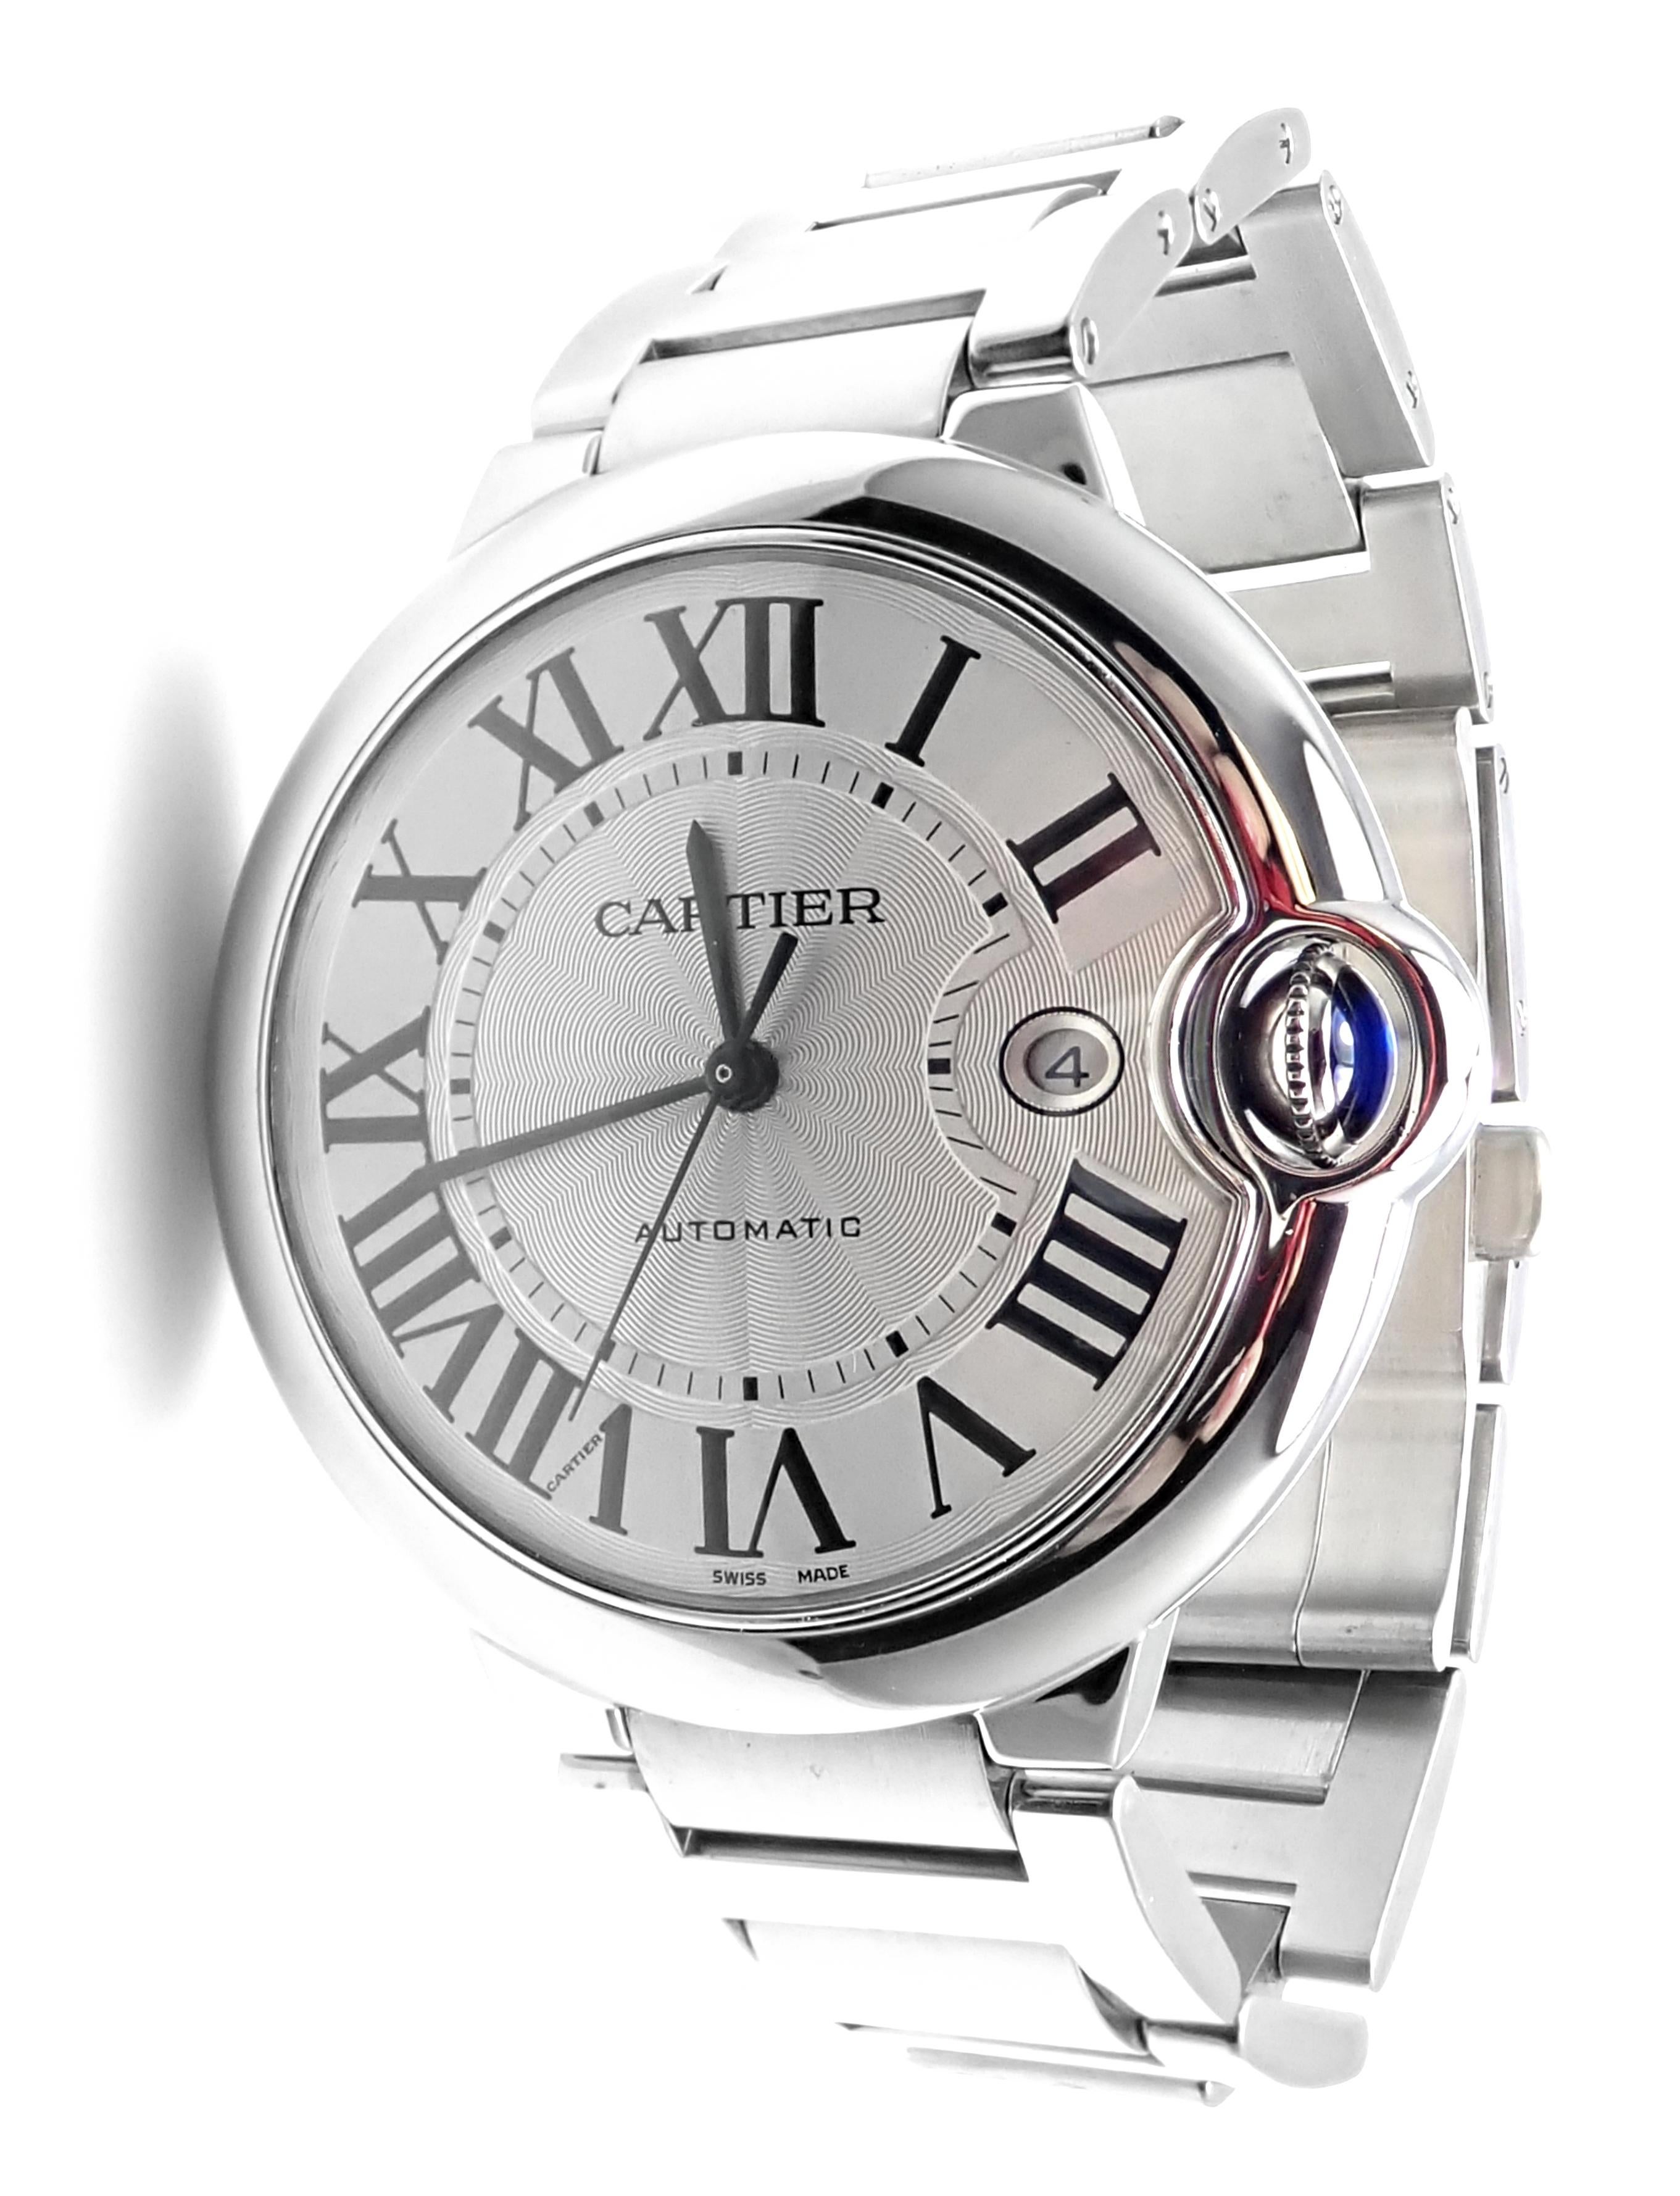 Stainless Steel Ballon Bleu Automatic 42mm Wristwatch Reference W69012Z4 by Cartier. 
Details:
Brand: Cartier
Model: Ballon Bleu
Reference: W69012Z4
Movement: Original Cartier Automatic
Case in stainless steel
Case size: 42mm
Band in stainless steel